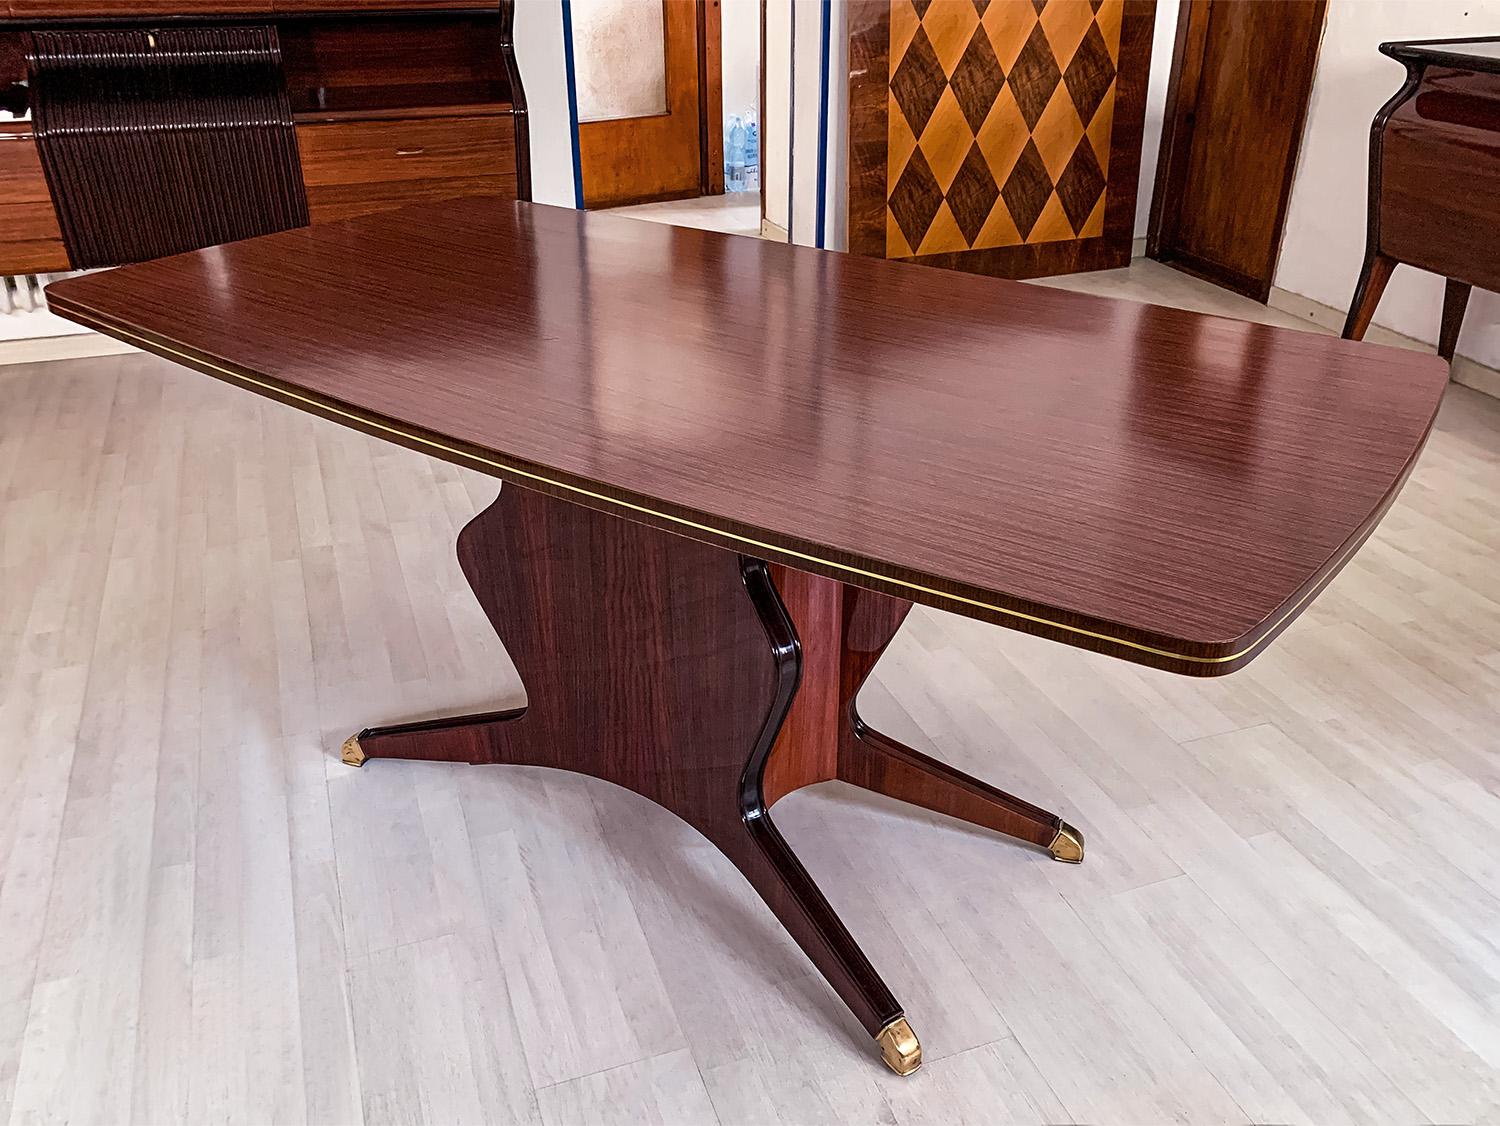 Stylish dining table designed by Osvaldo Borsani, a really statement piece and a great example of 1950s Italian design.
Its structure is characterized by a unique shape design, finished with brass feet and provided with formica top table.
The